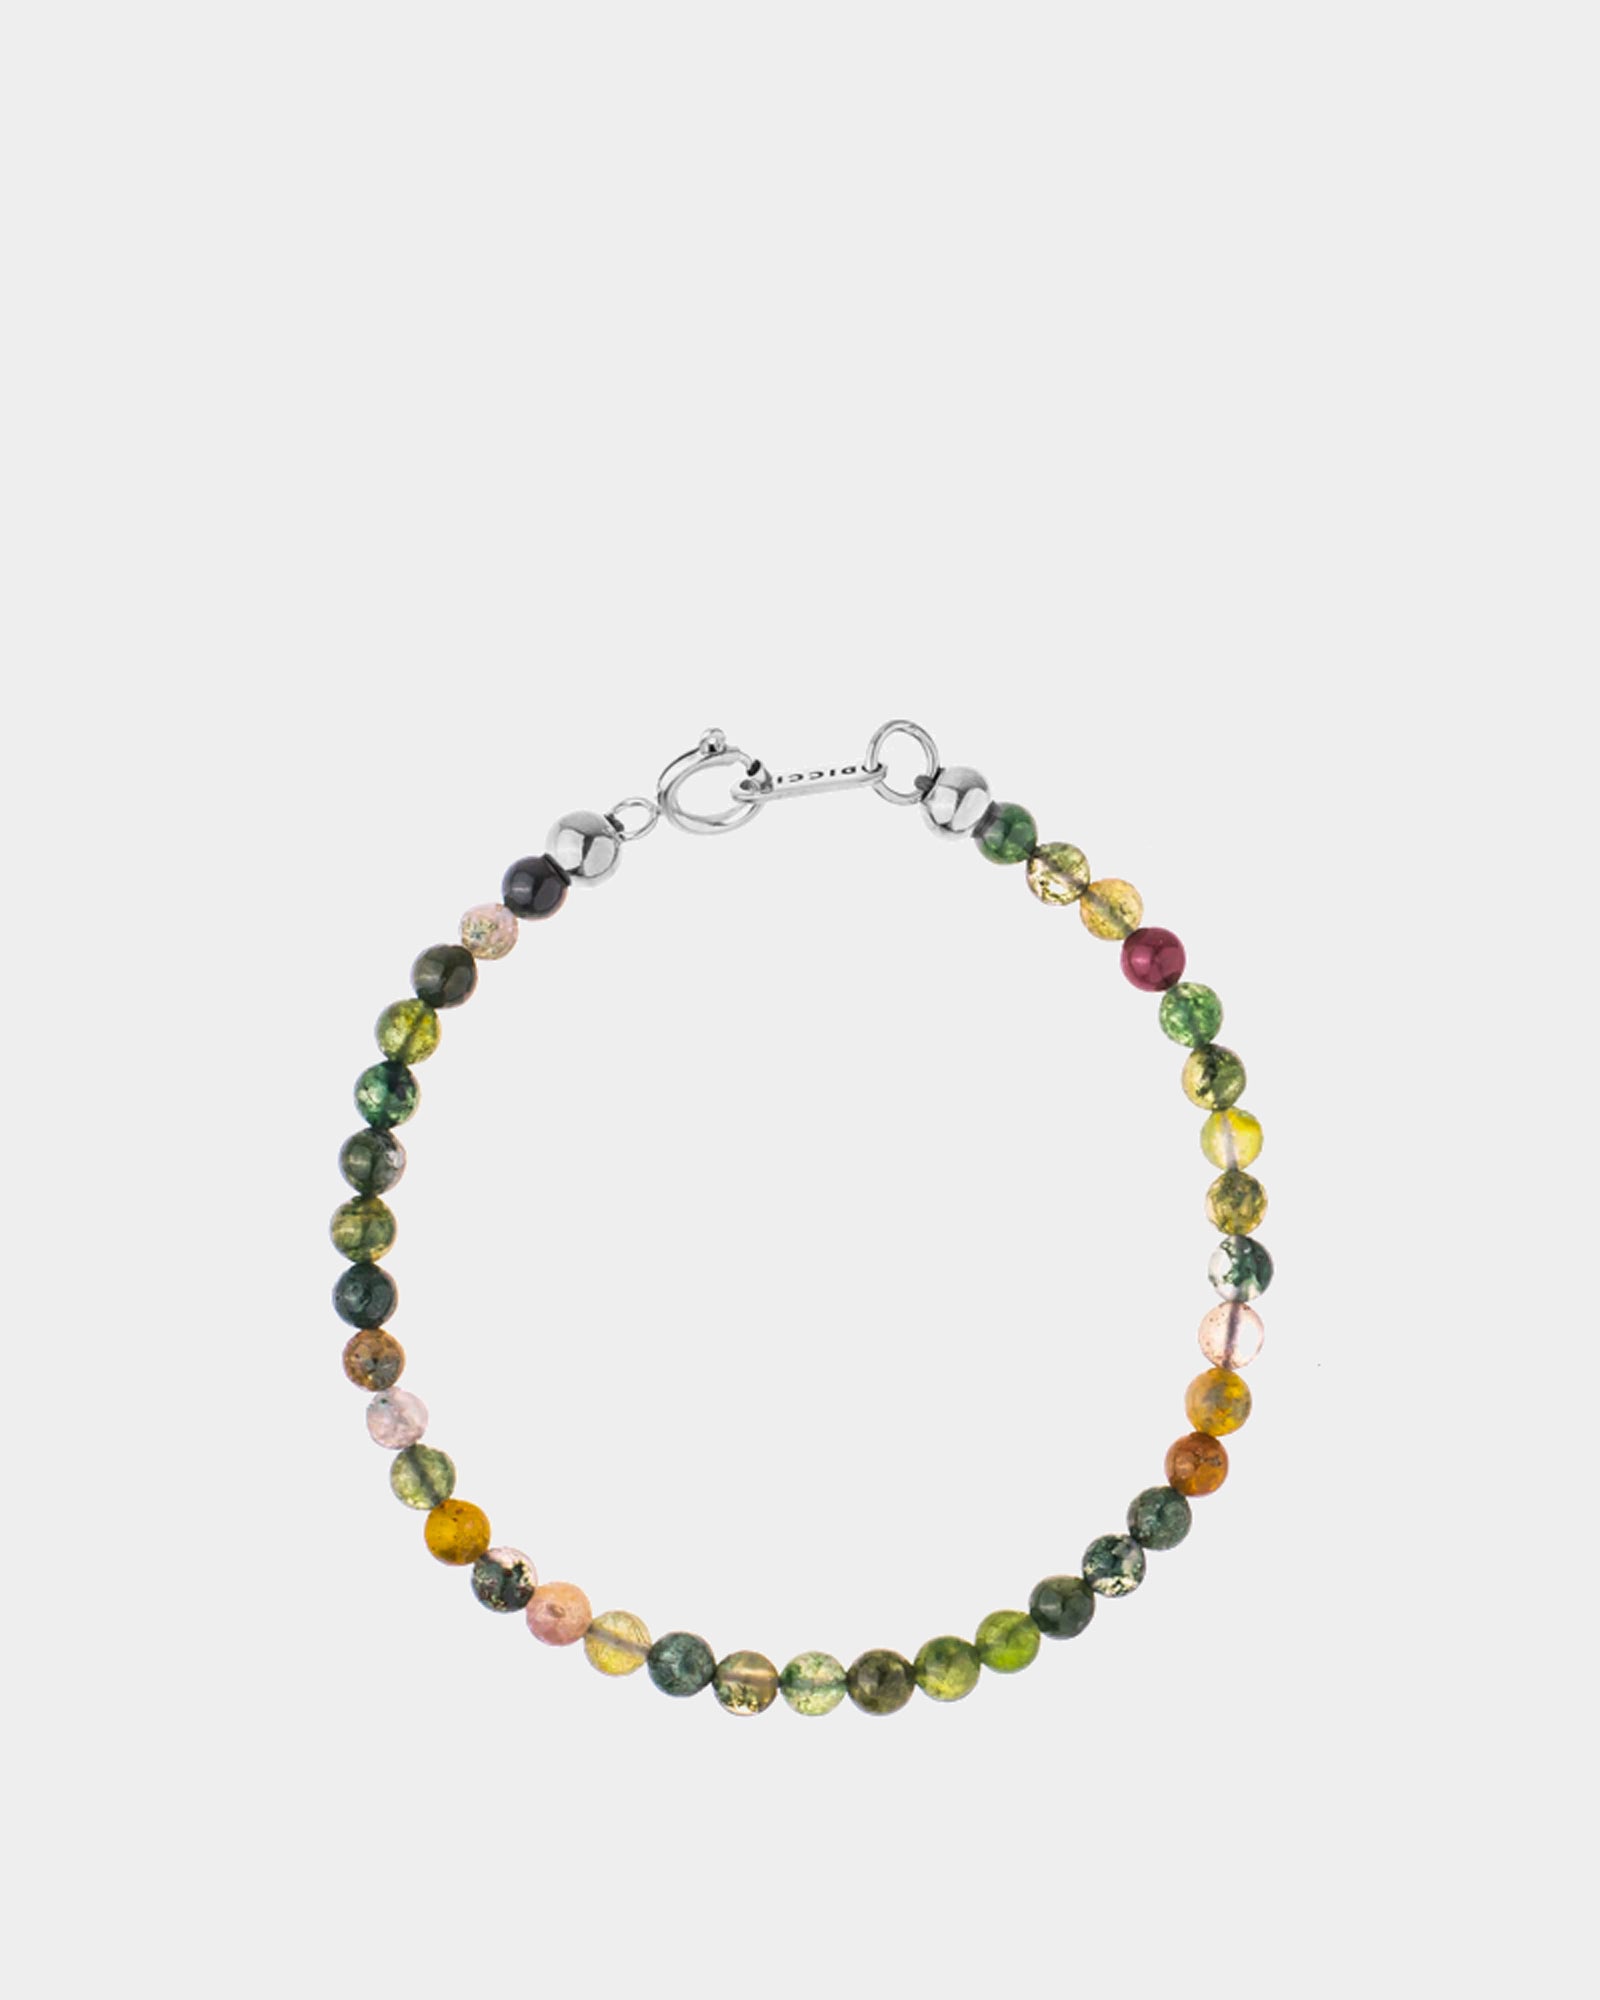 Green Agate Stone Bracelet 4mm - Natural Beads and 316L stainless steel - Online Unissex Jewelry - Dicci